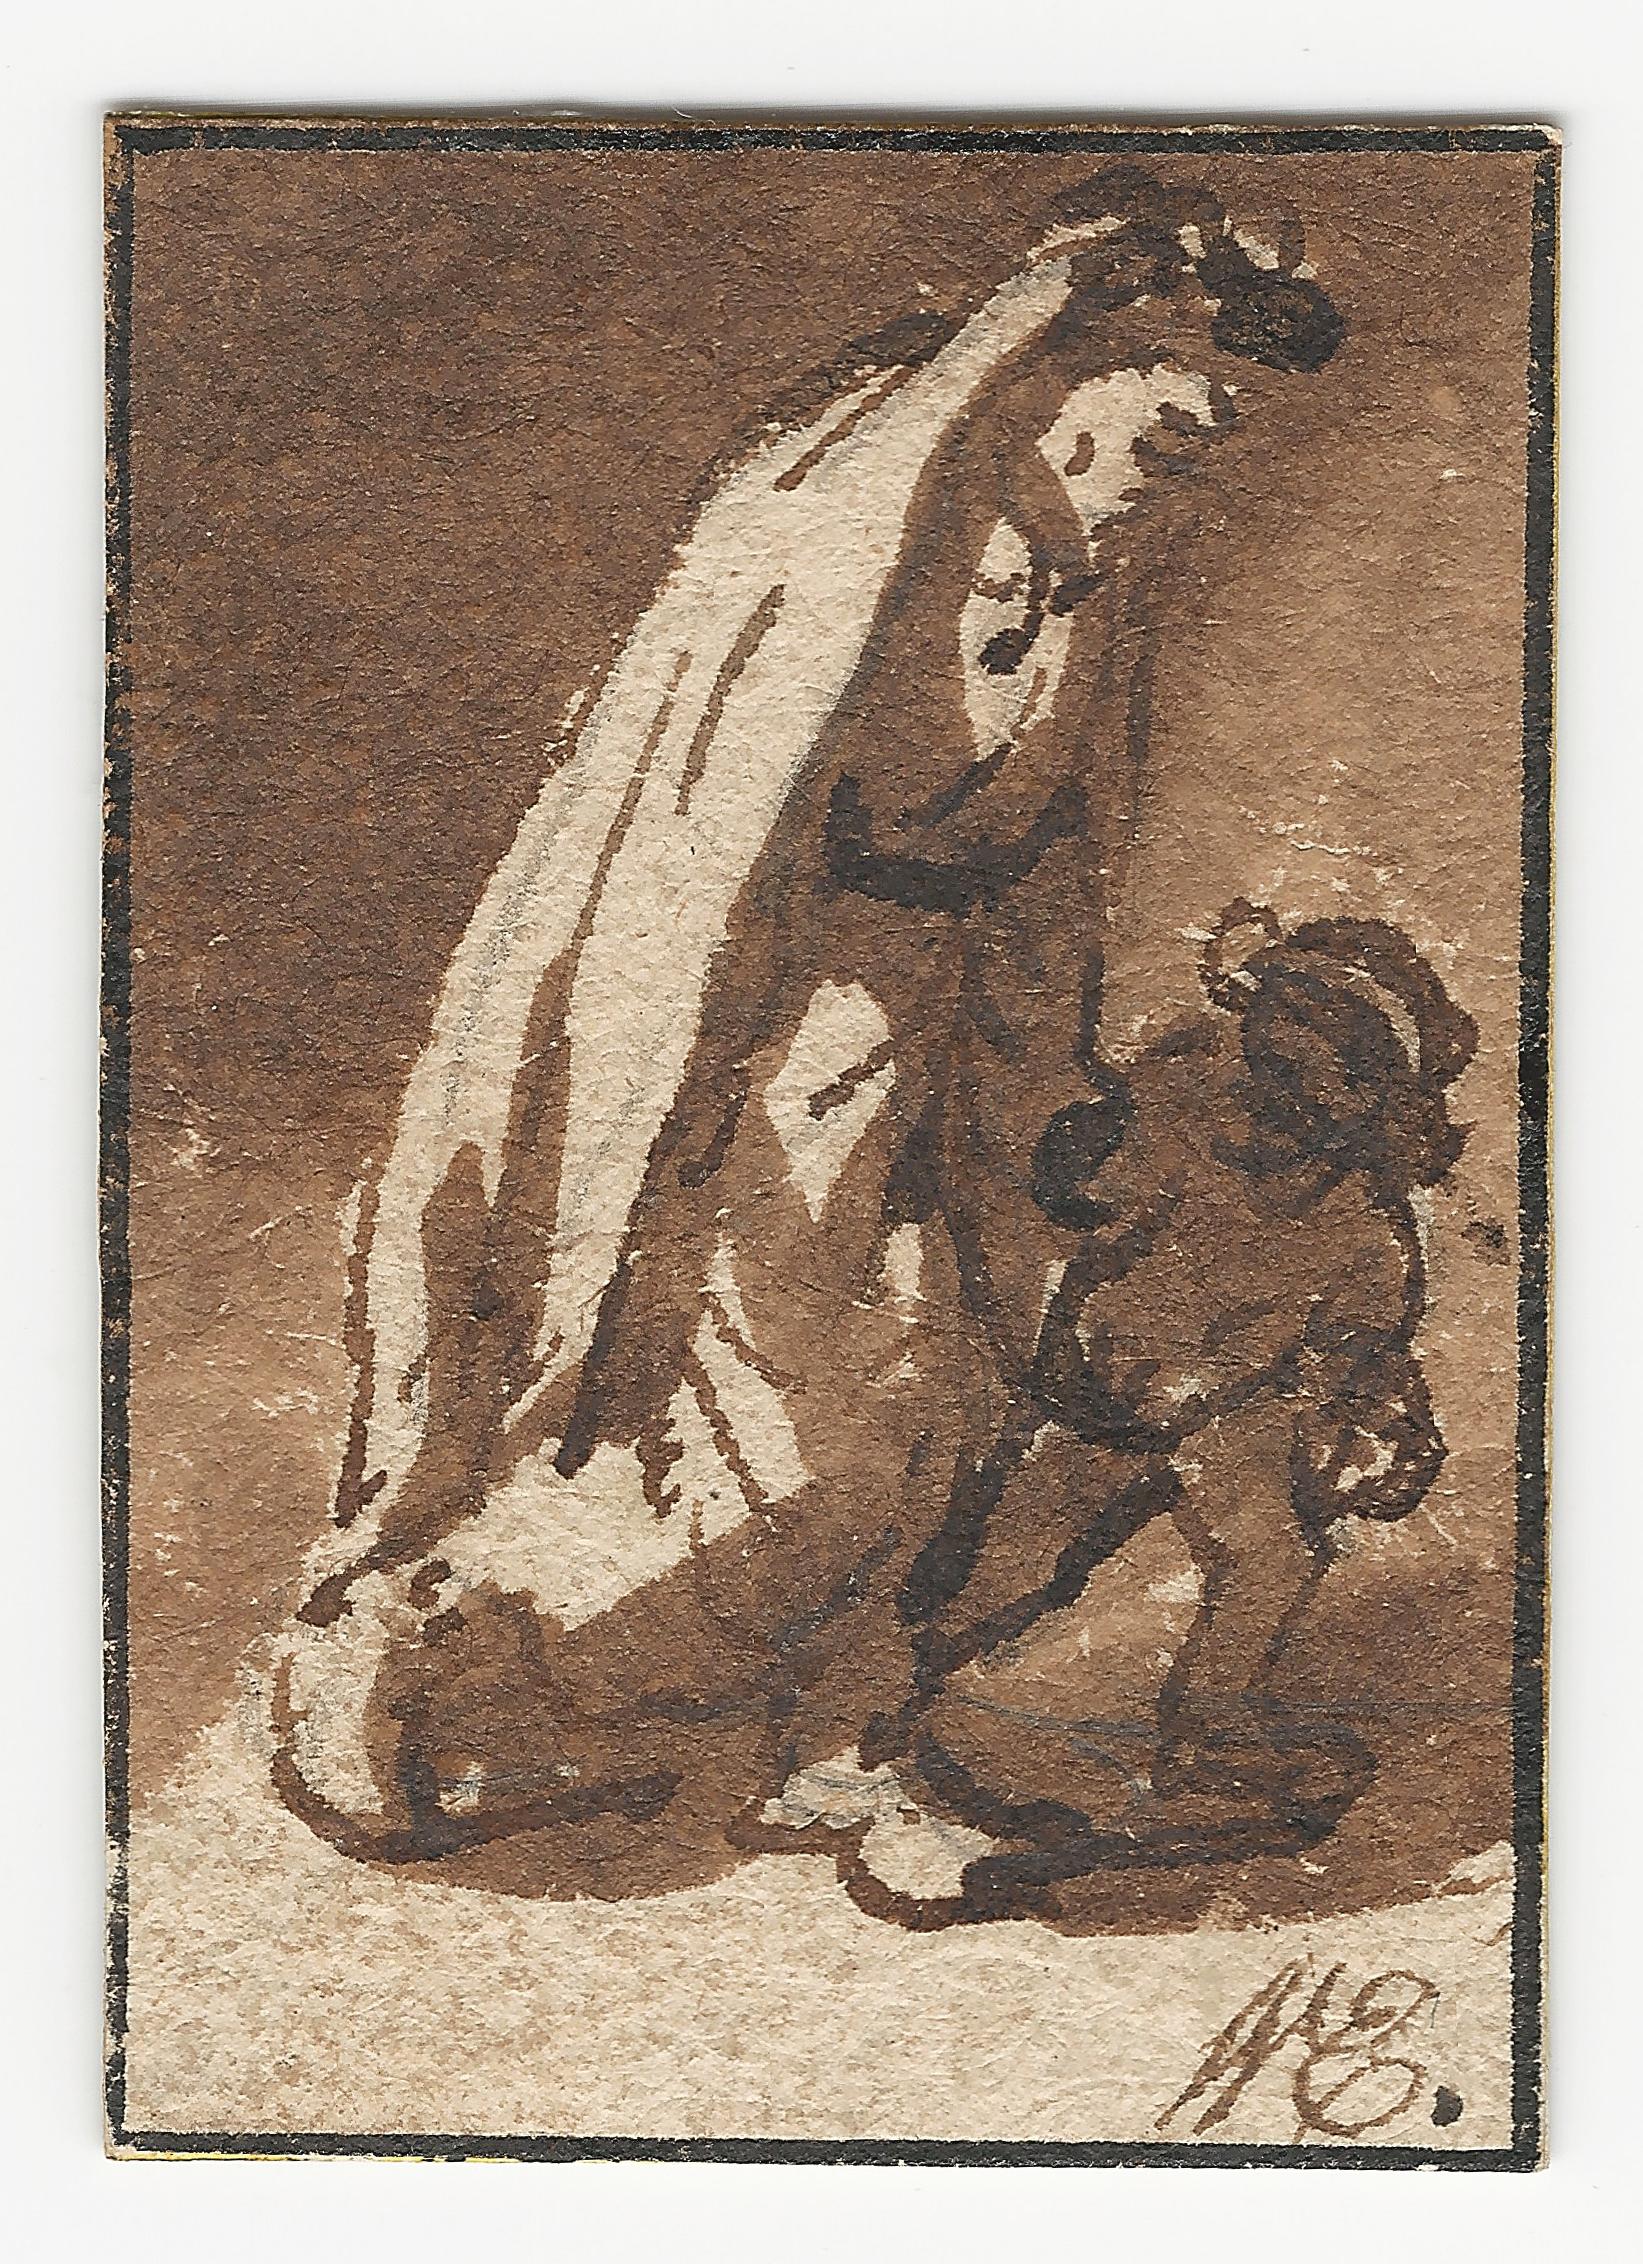 Isaac van Ostade (Haarlem 1621 – 1649 Haarlem)

A Woman and a Child Walking

Black chalk, pen and brown ink, brown wash, black ink framing lines, laid down, 43 x 30 mm (1.7 x 1.2 inch)

Provenance
- Thomas Dimsdale (1758–1823), London (Lugt 2426)
-